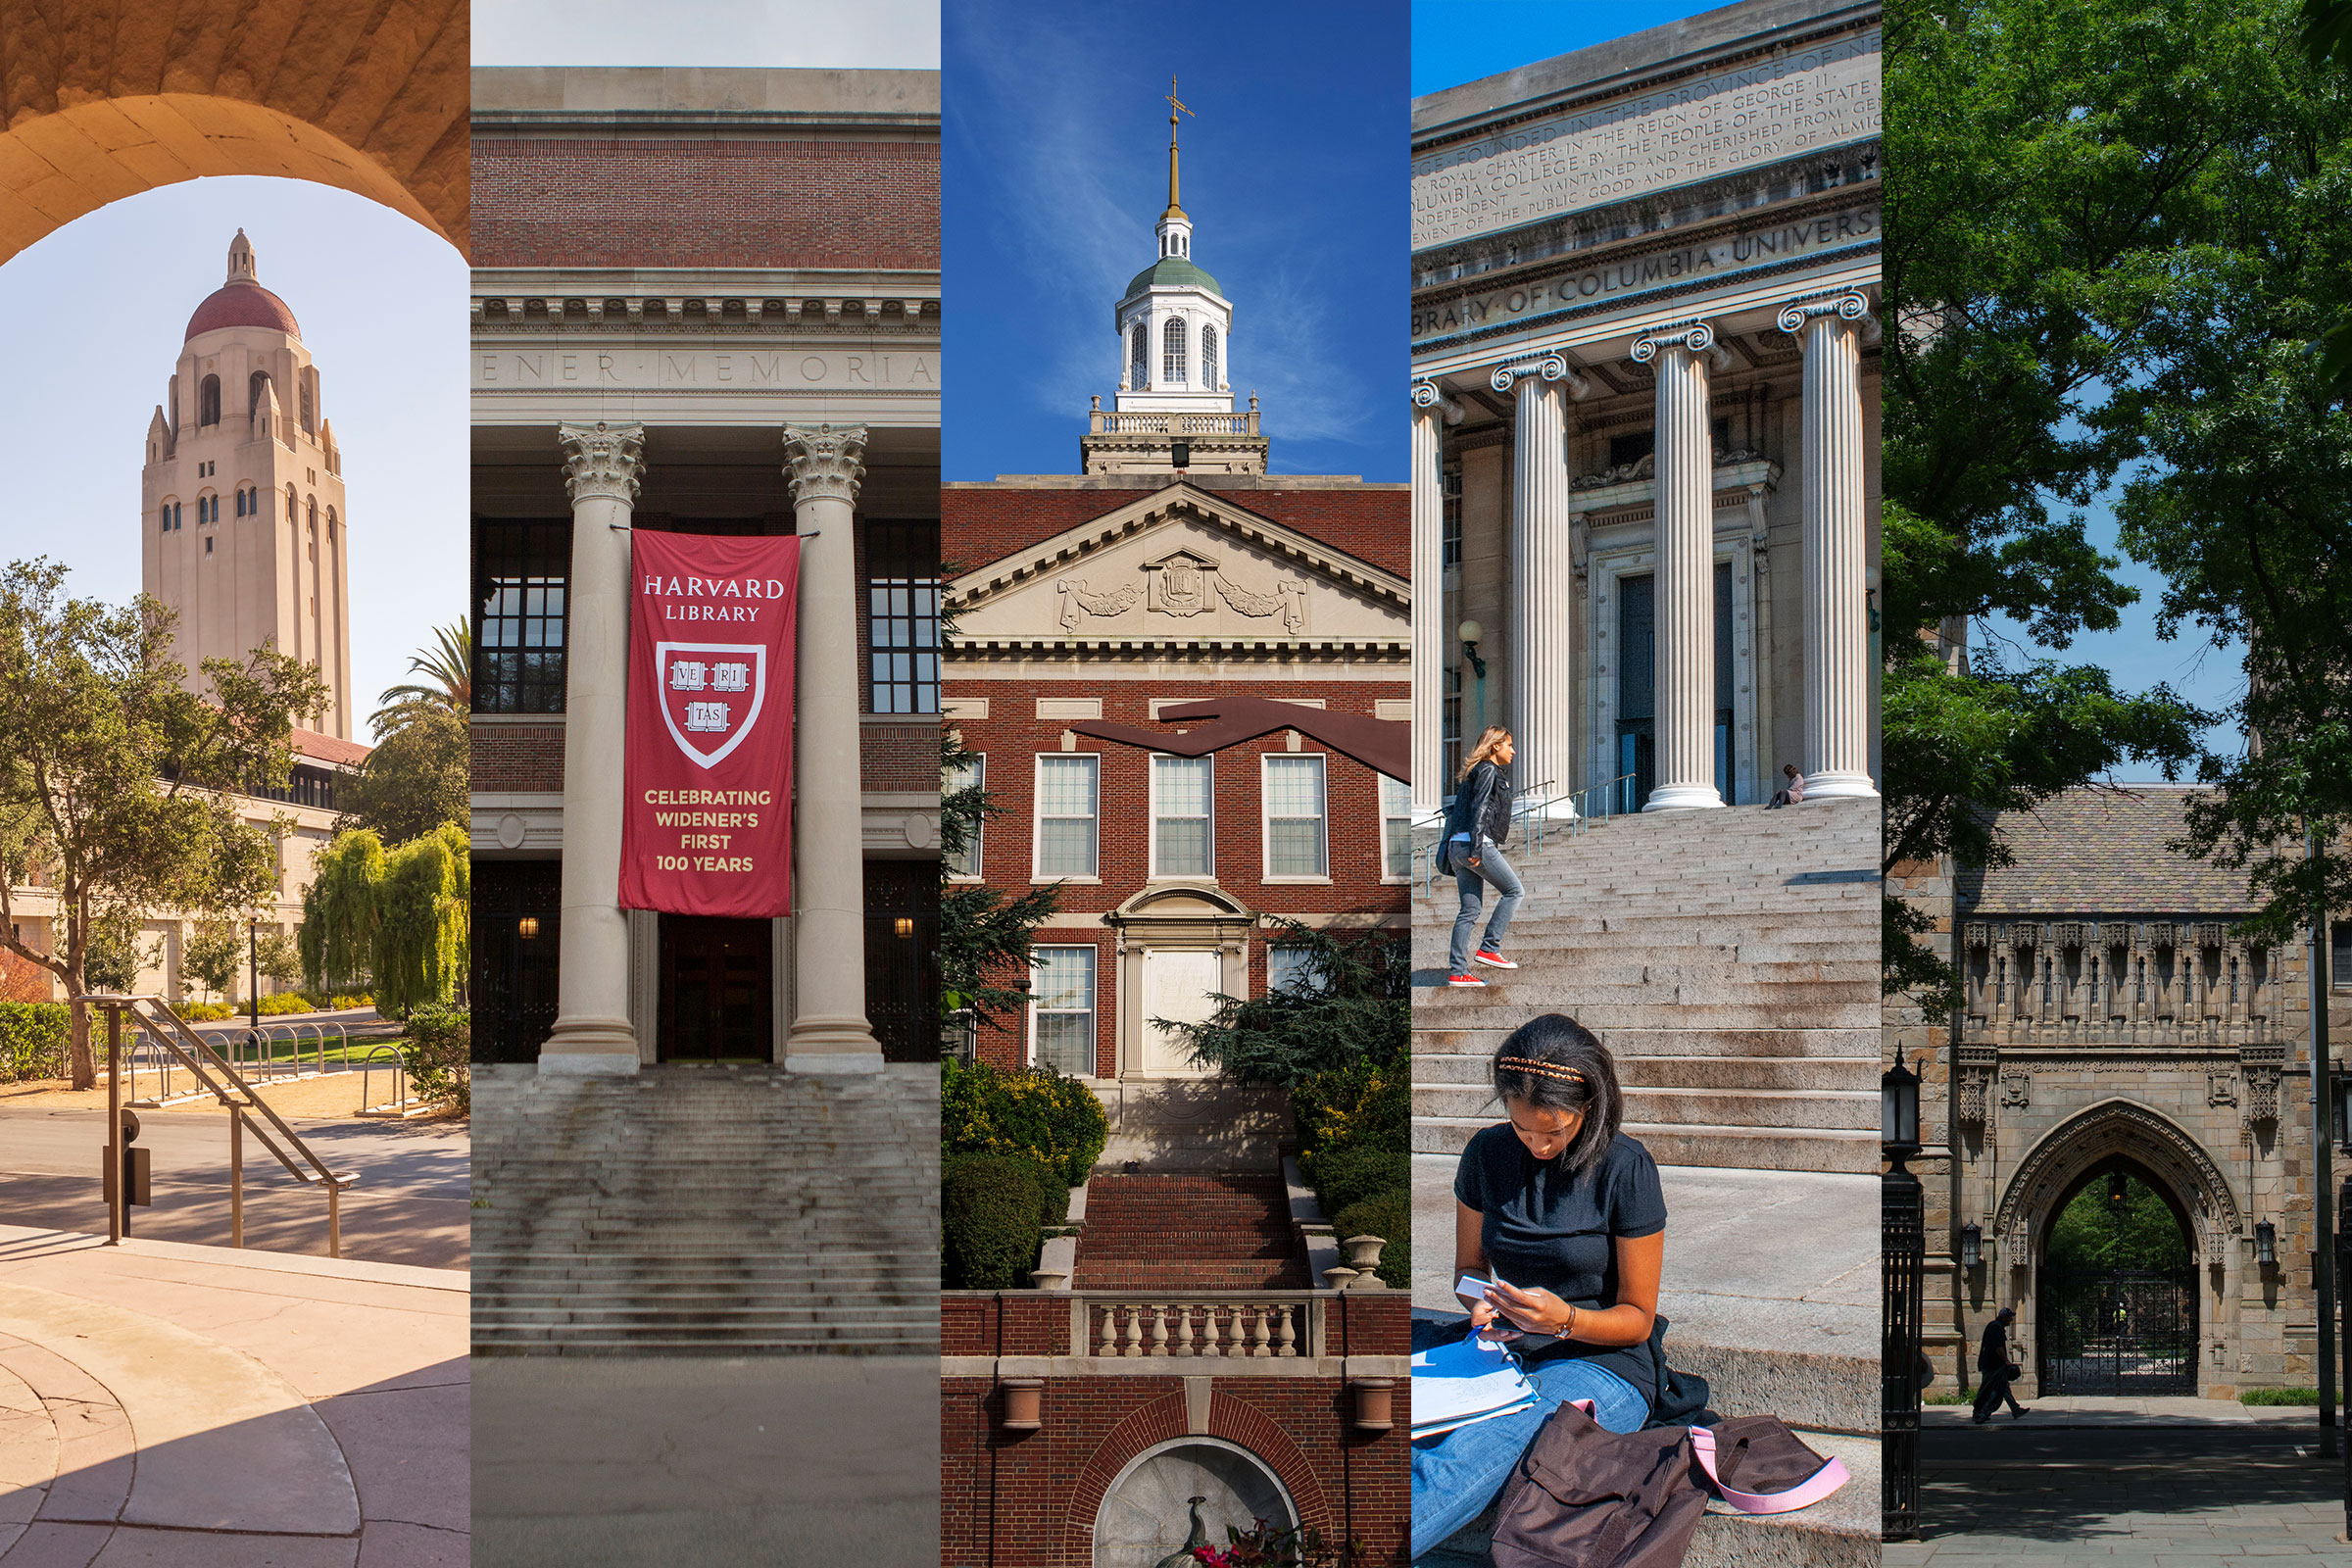 TIME spoke to several college guidance counselors who say they have been steering students and parents away from the rankings for years. (David Madison—Getty Images; Victor J. Blue—Bloomberg/Getty Images; Drew Angerer—Getty Images; Sergi Reboredo—VW Pics/Universal Images Group/Getty Images; Craig Warga—Bloomberg/Getty Images)